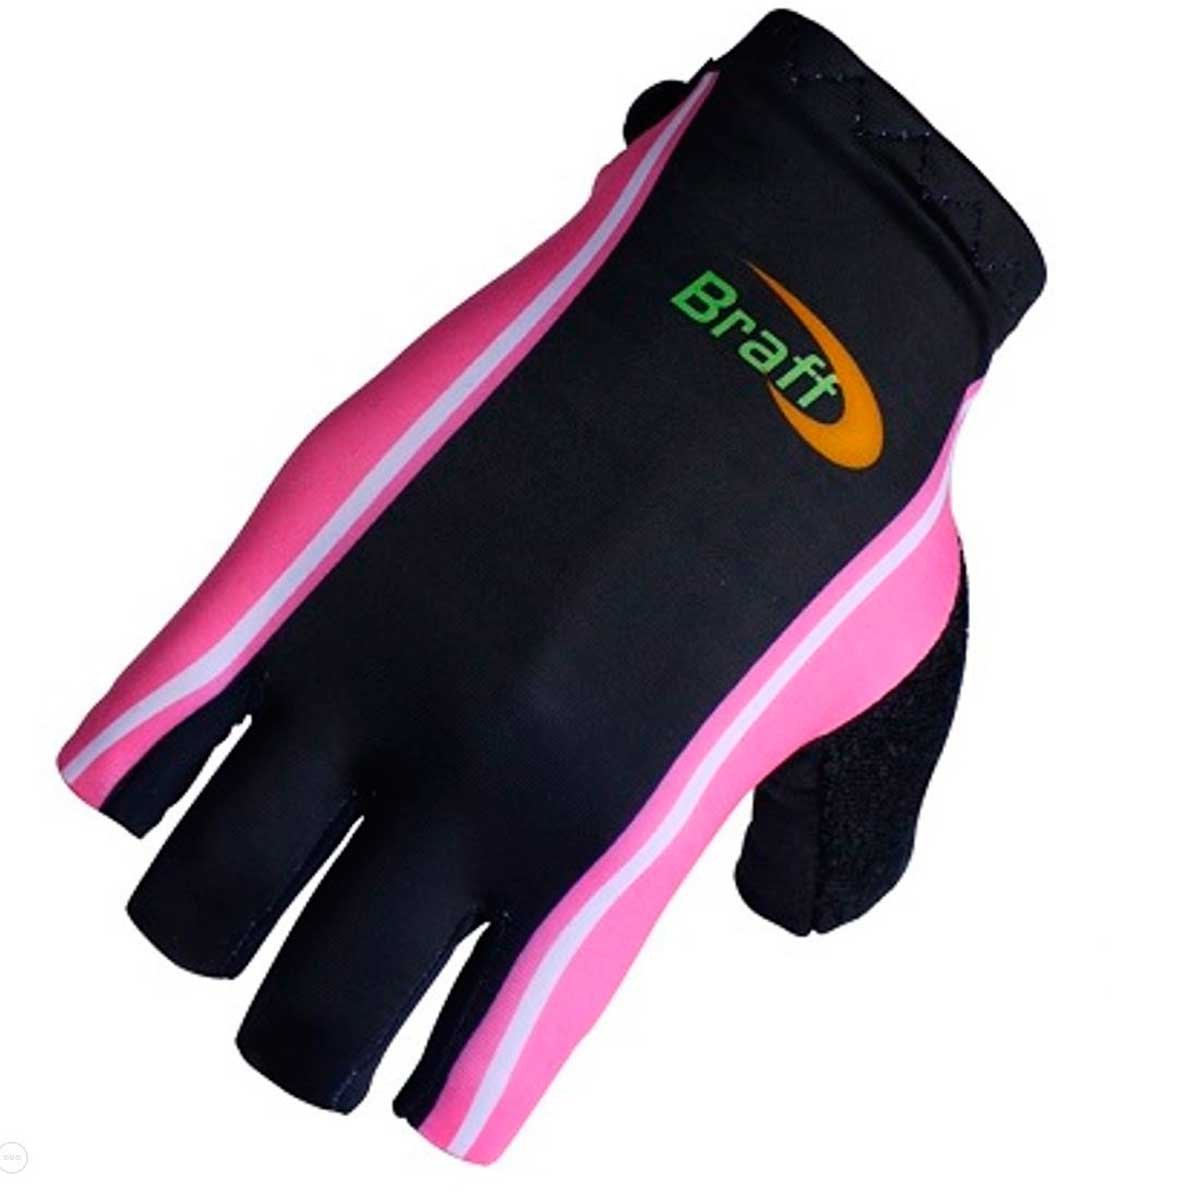 Guantes Fitness Verri para Mujer  Chica